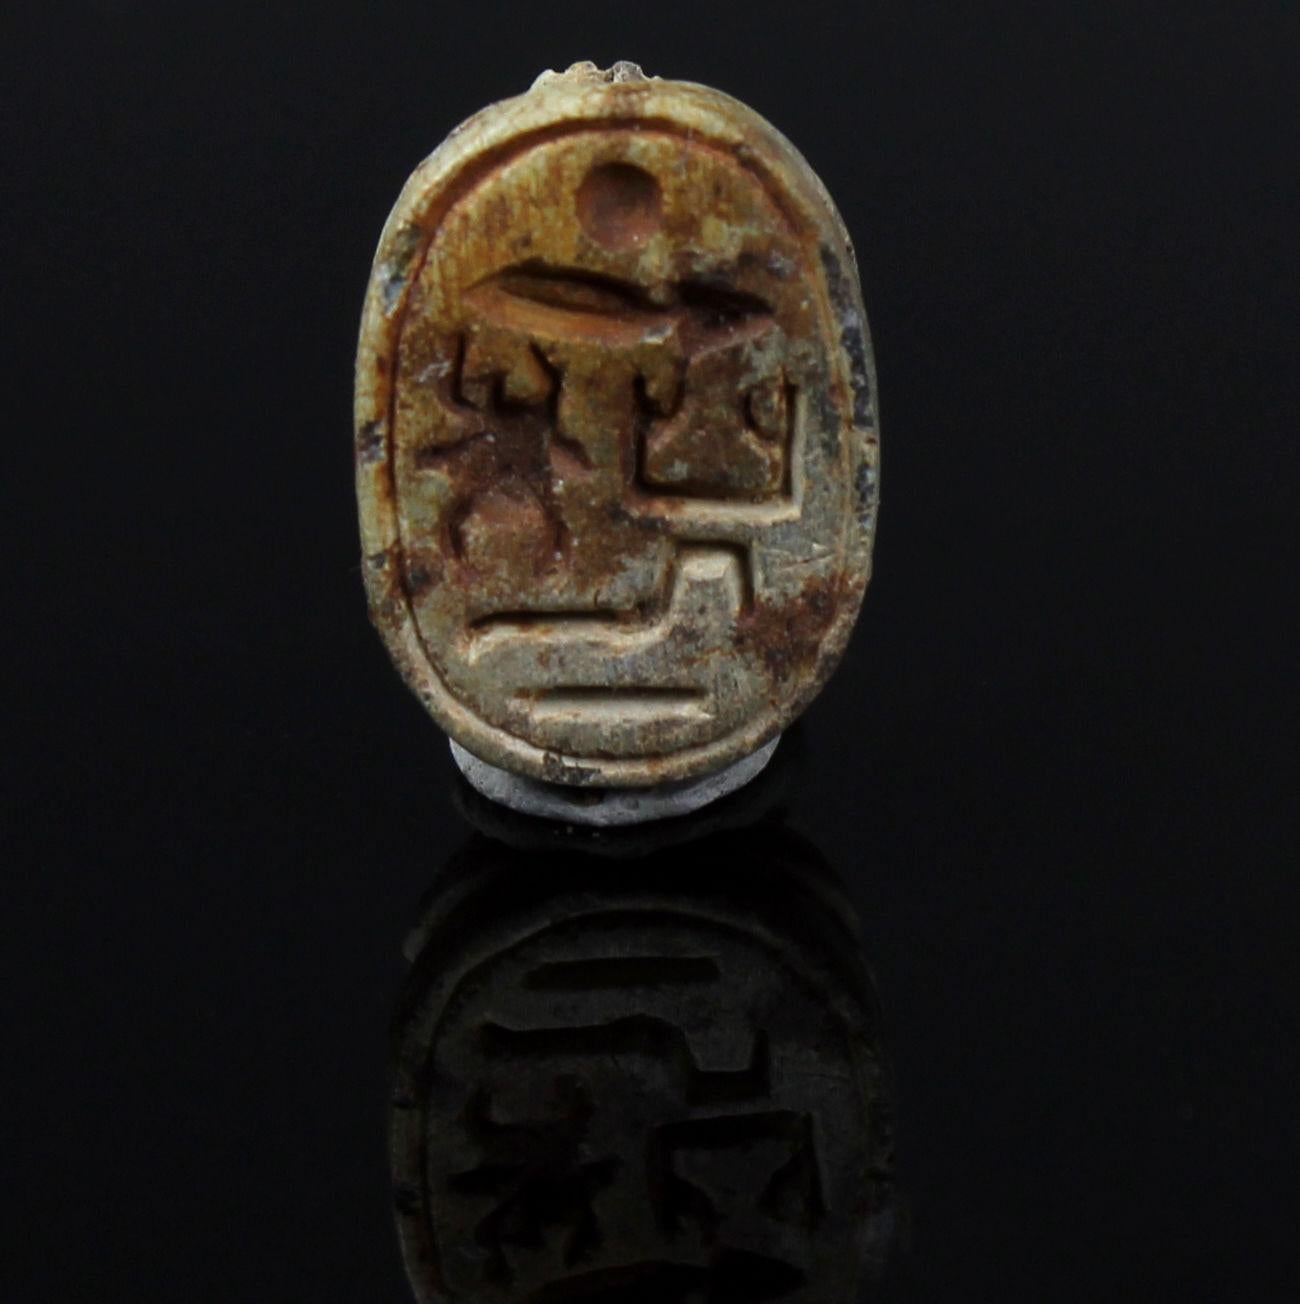 ITEM: Scarab with prenomen for Amenhotep II
MATERIAL: Steatite
CULTURE: Egyptian
PERIOD: New Kingdom, XVIIIth Dynasty, 1143 – 1417 B.C
DIMENSIONS: 15 mm x 11 mm
CONDITION: Good condition
PROVENANCE: Ex American egyptologist collection, active in the